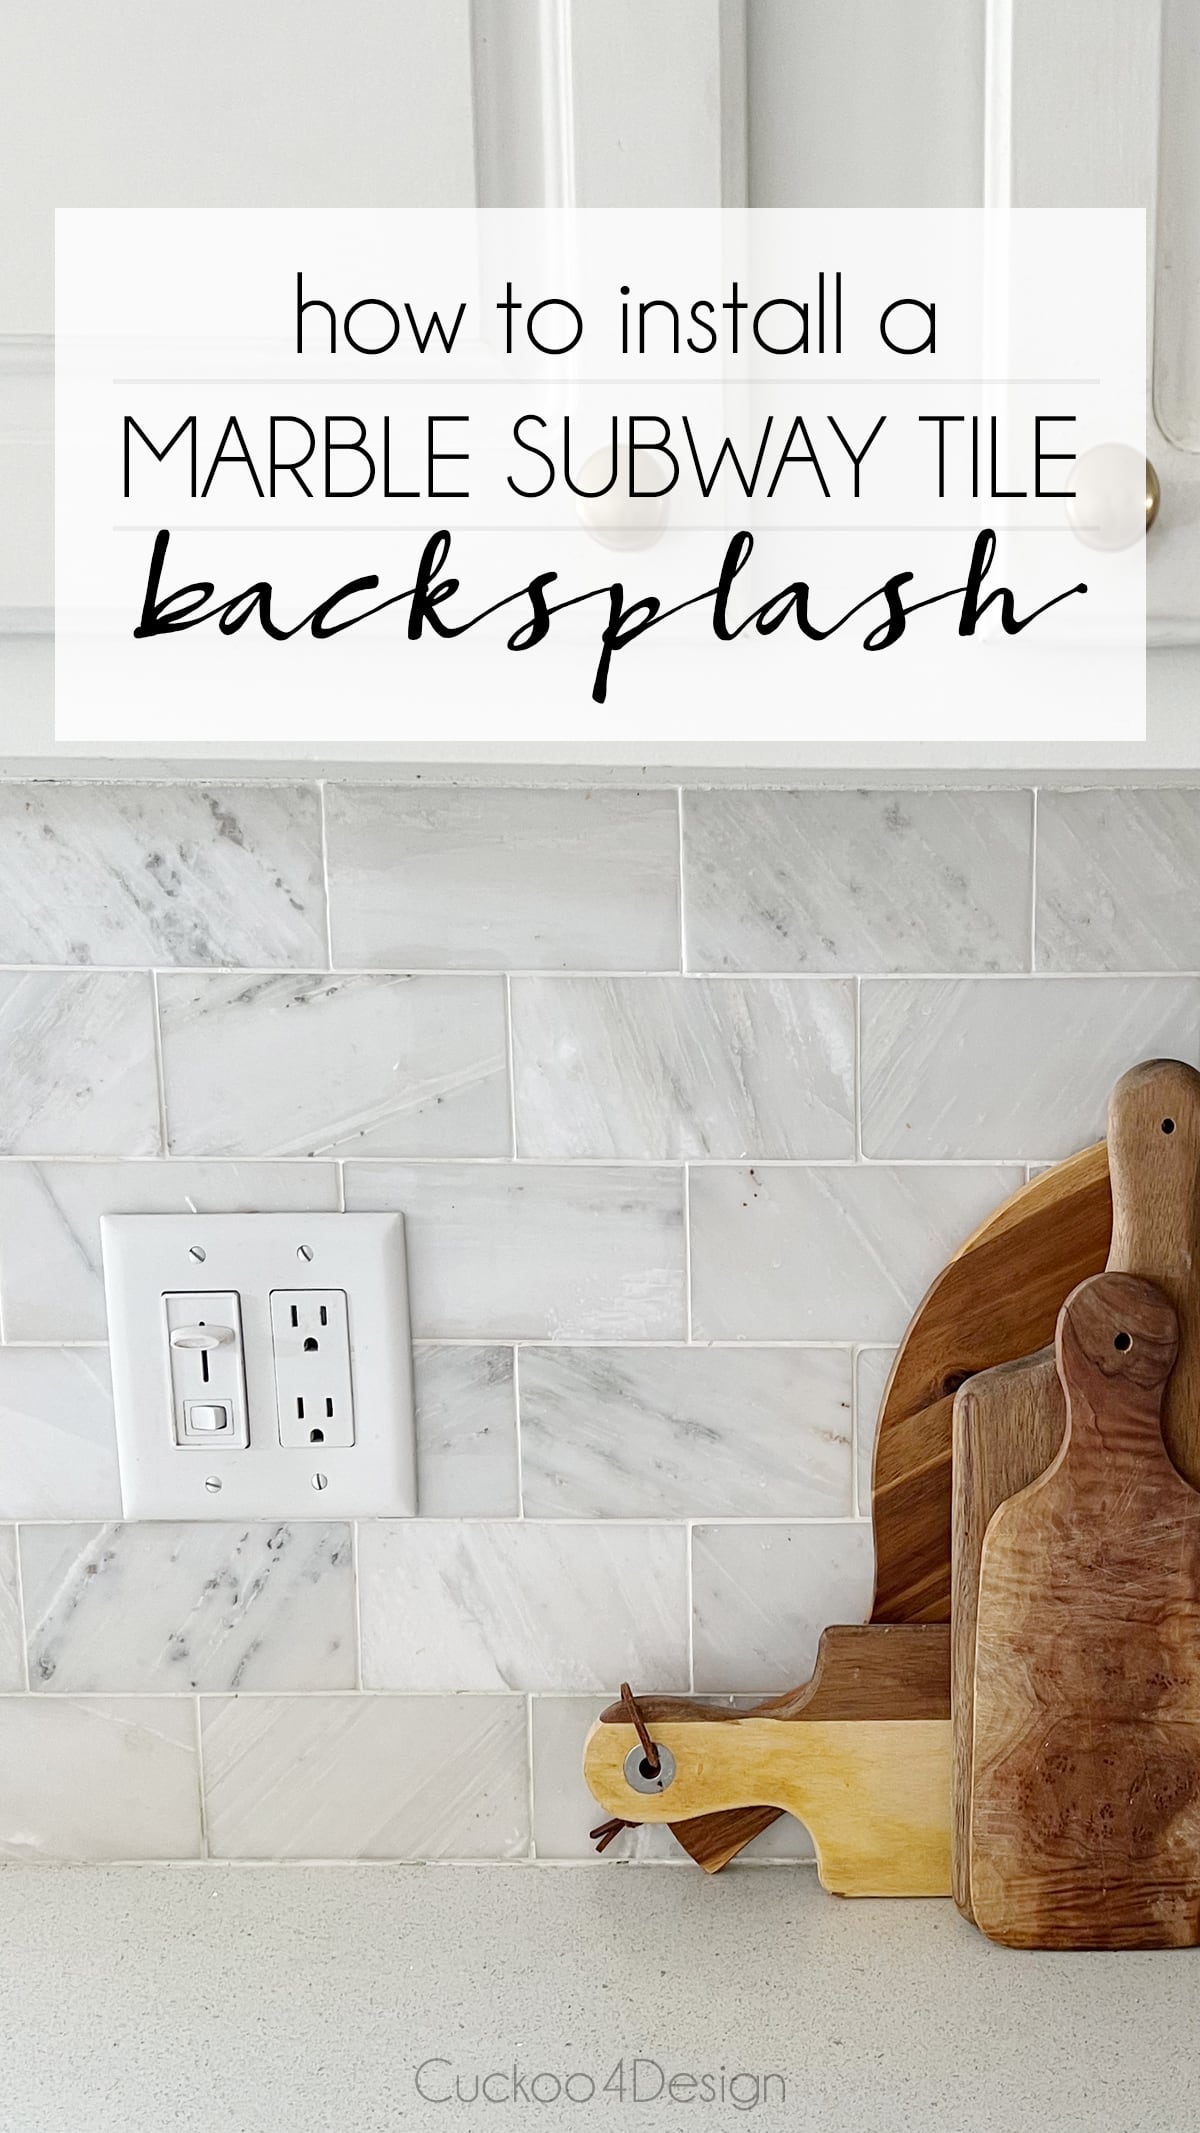 how to install a marble subway tile backsplash